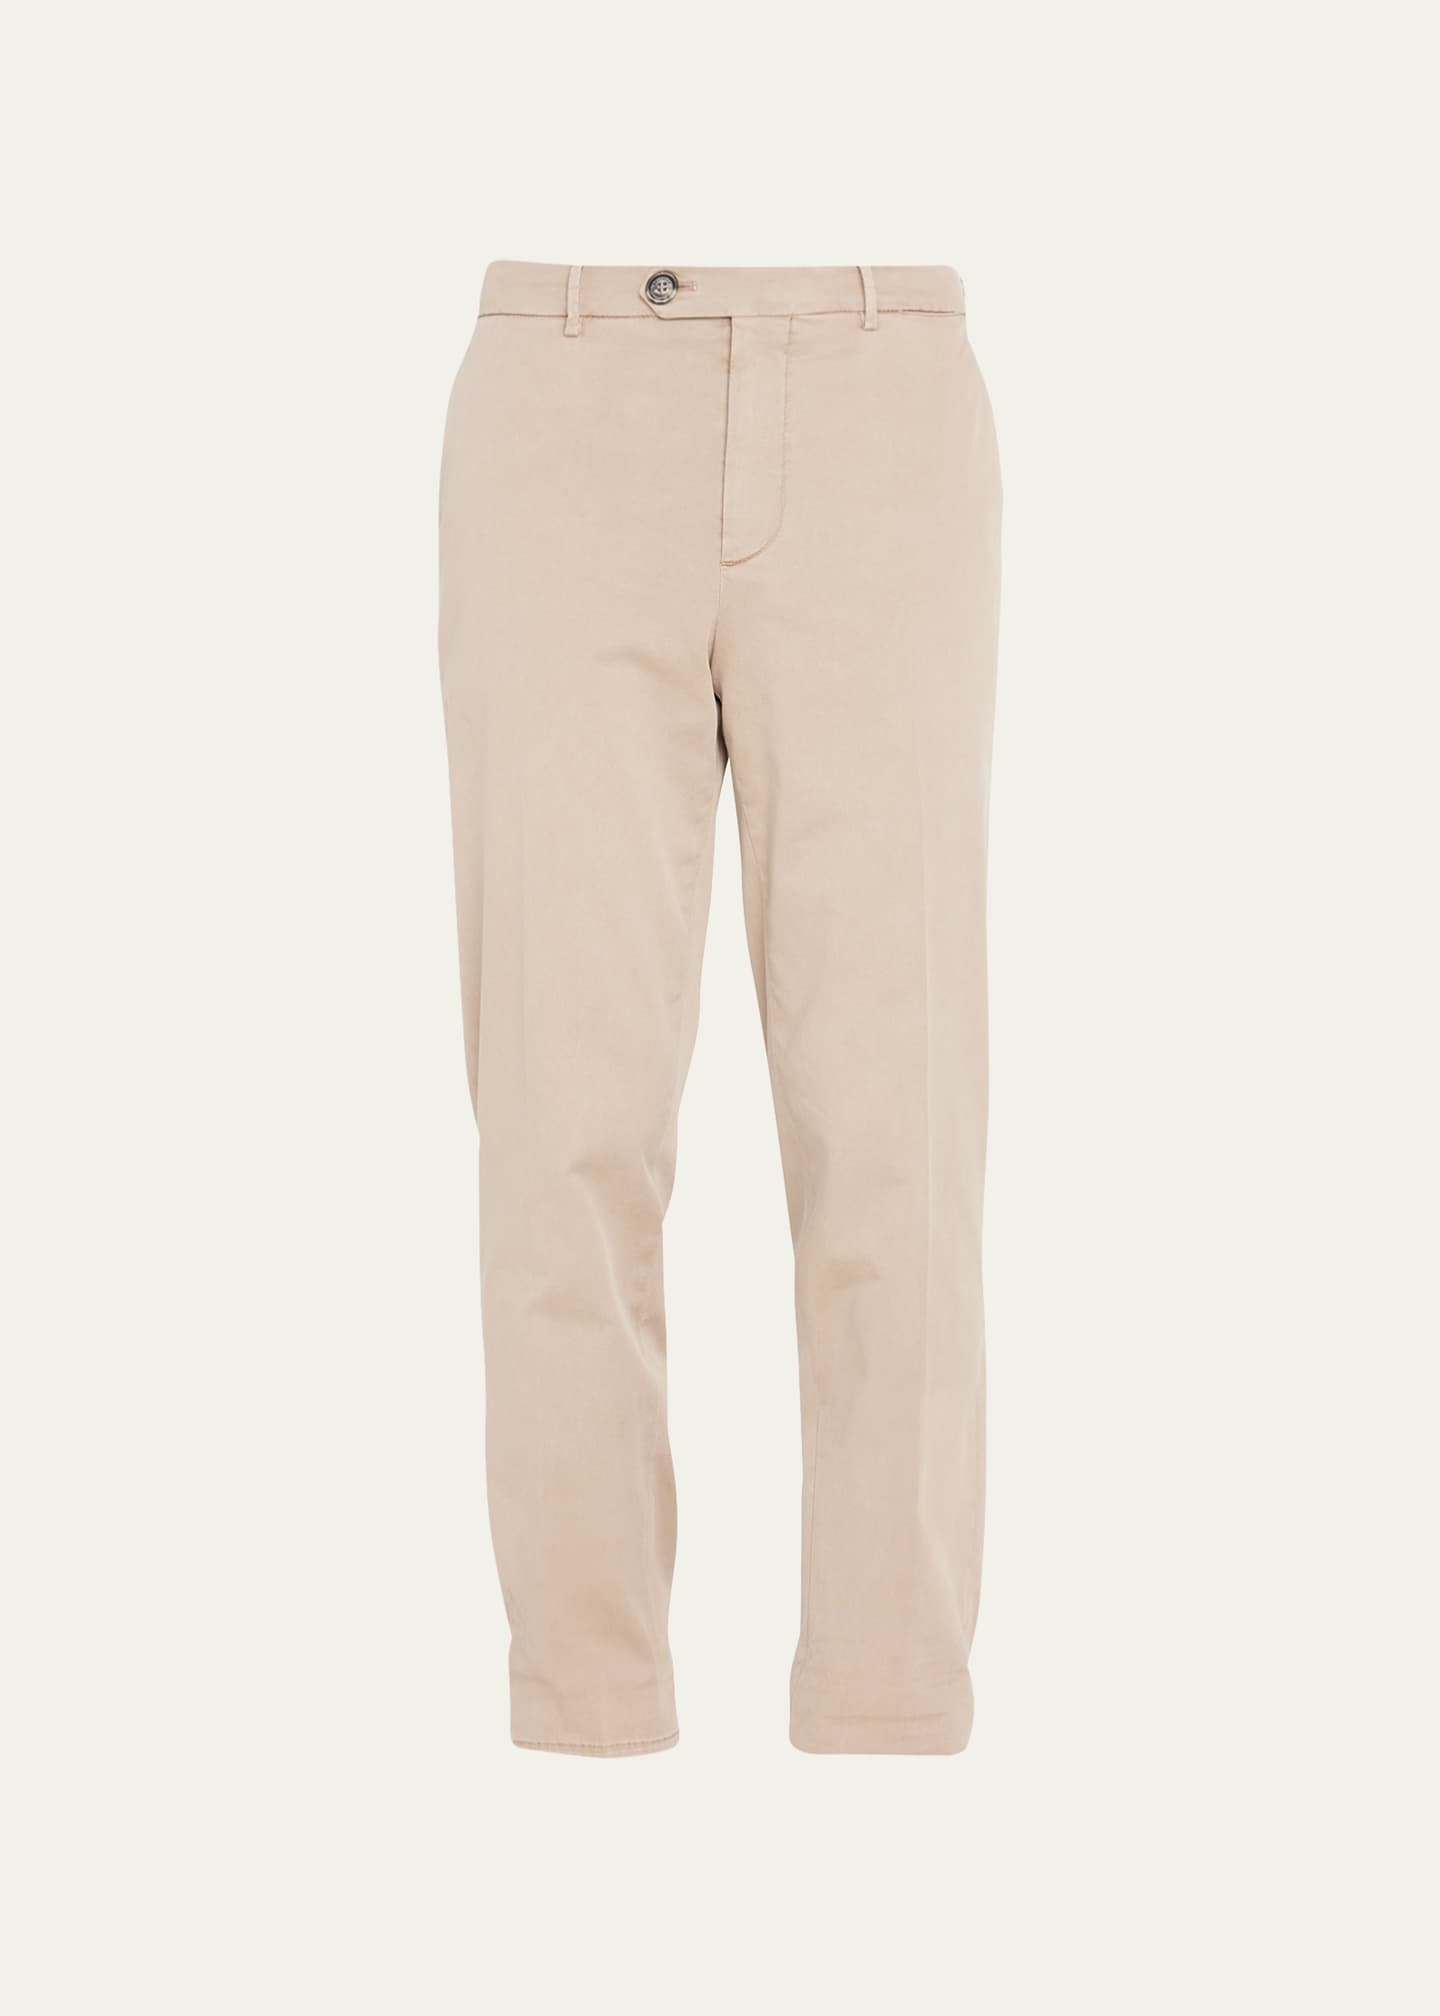 Brunello Cucinelli Men's Stretch-Twill Tapered Pants